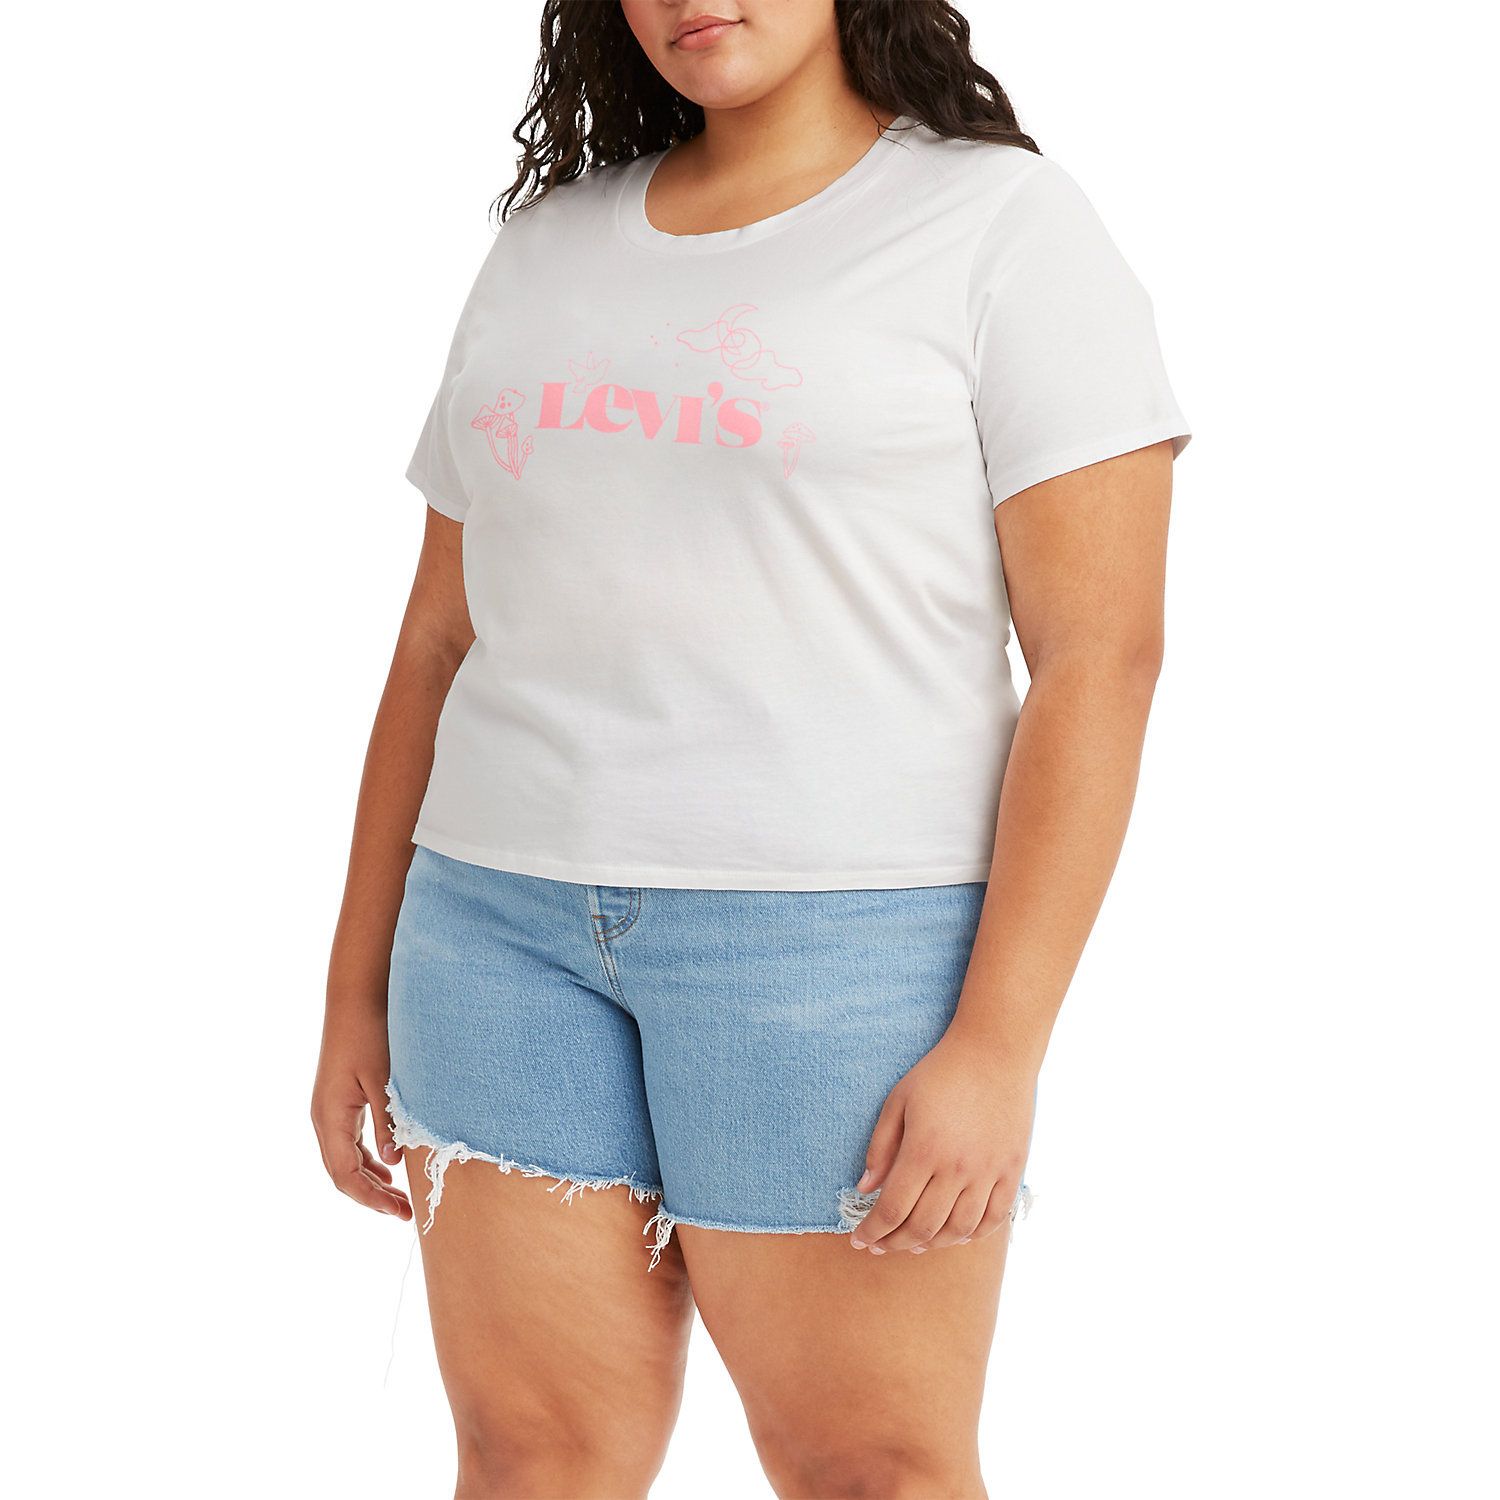 Image for Levi's Plus Size Graphic Surf T-Shirt at Kohl's.